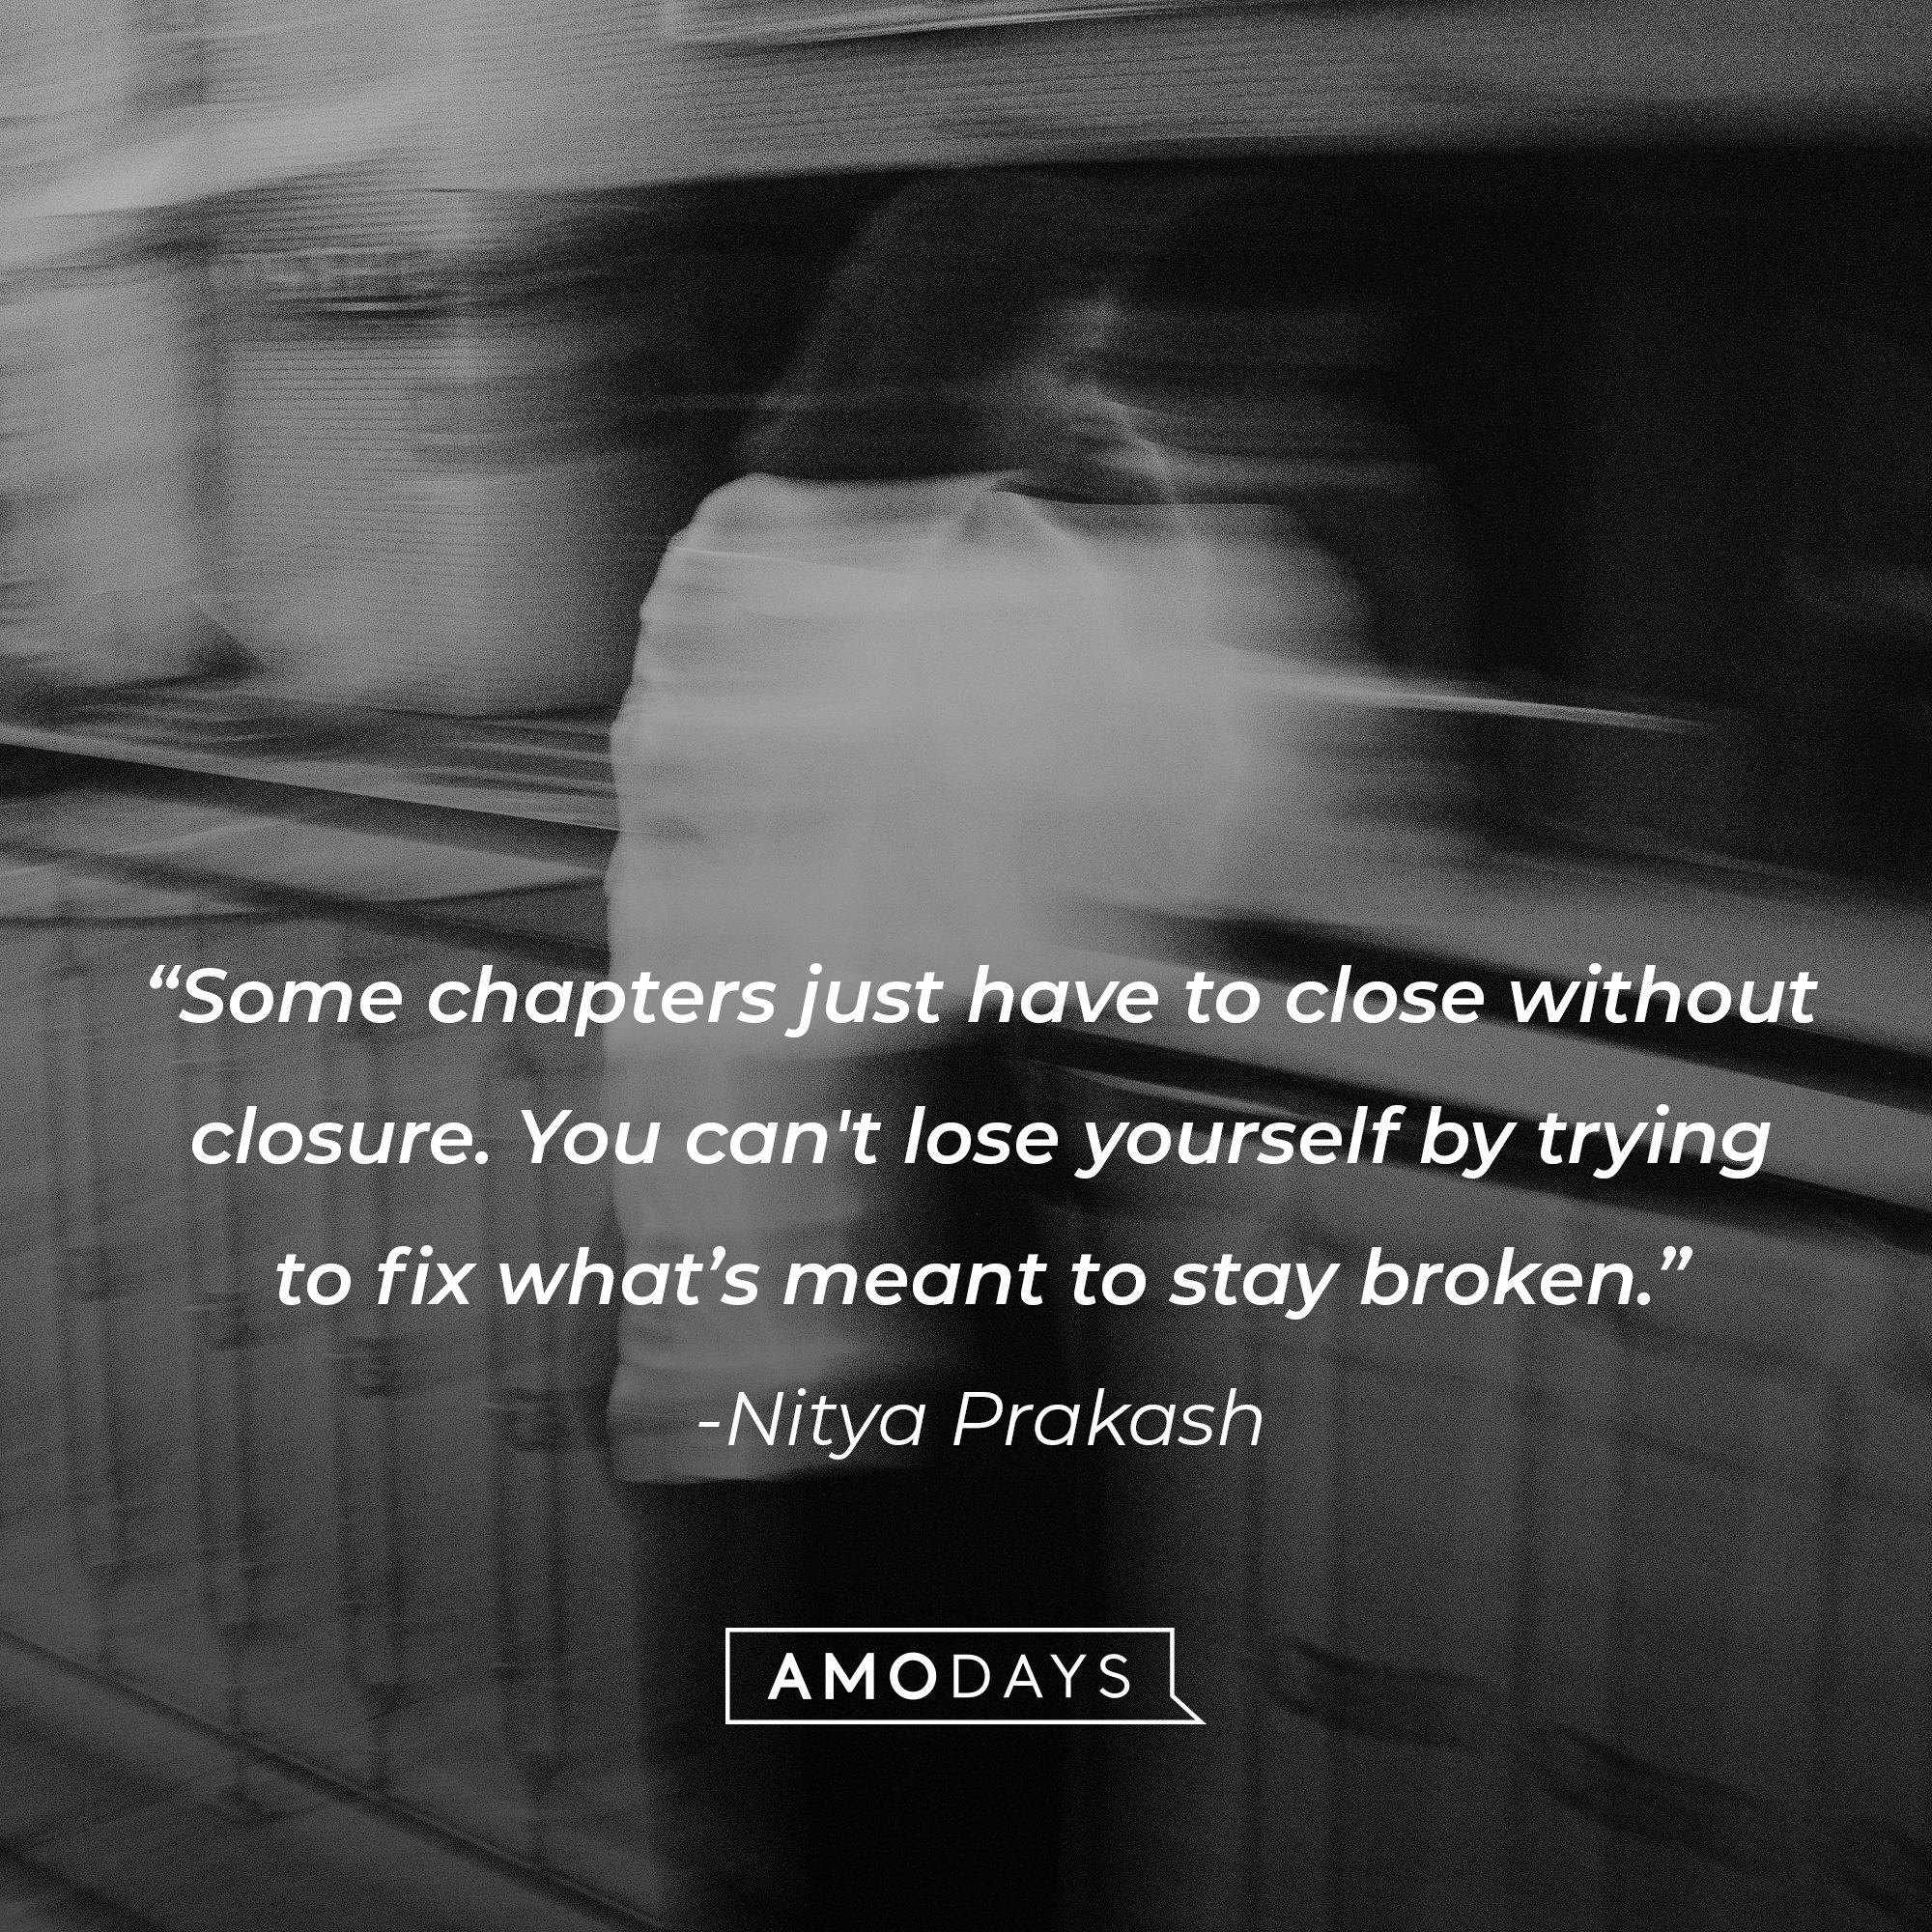 Nitya Prakash's quote: "Some chapters just have to close without closure. You can't lose yourself by trying to fix what's meant to stay broken." | Image: AmoDays